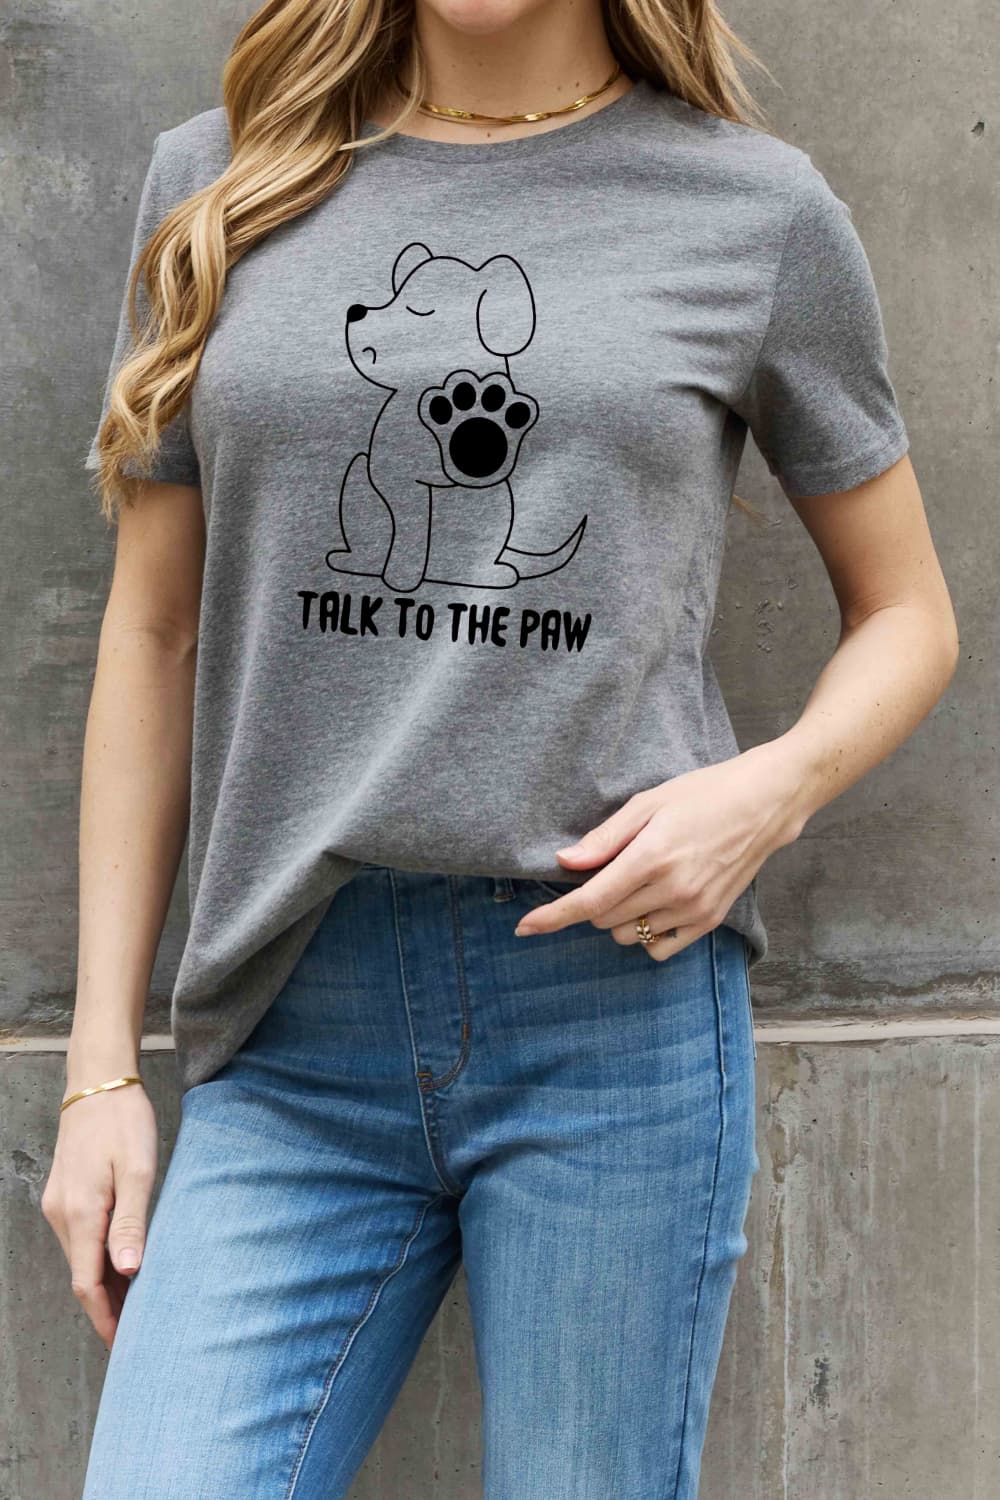 TALK TO THE PAW Dog Funny Graphic 100% Cotton Short Sleeve Tee Shirt (Plus Size Available)